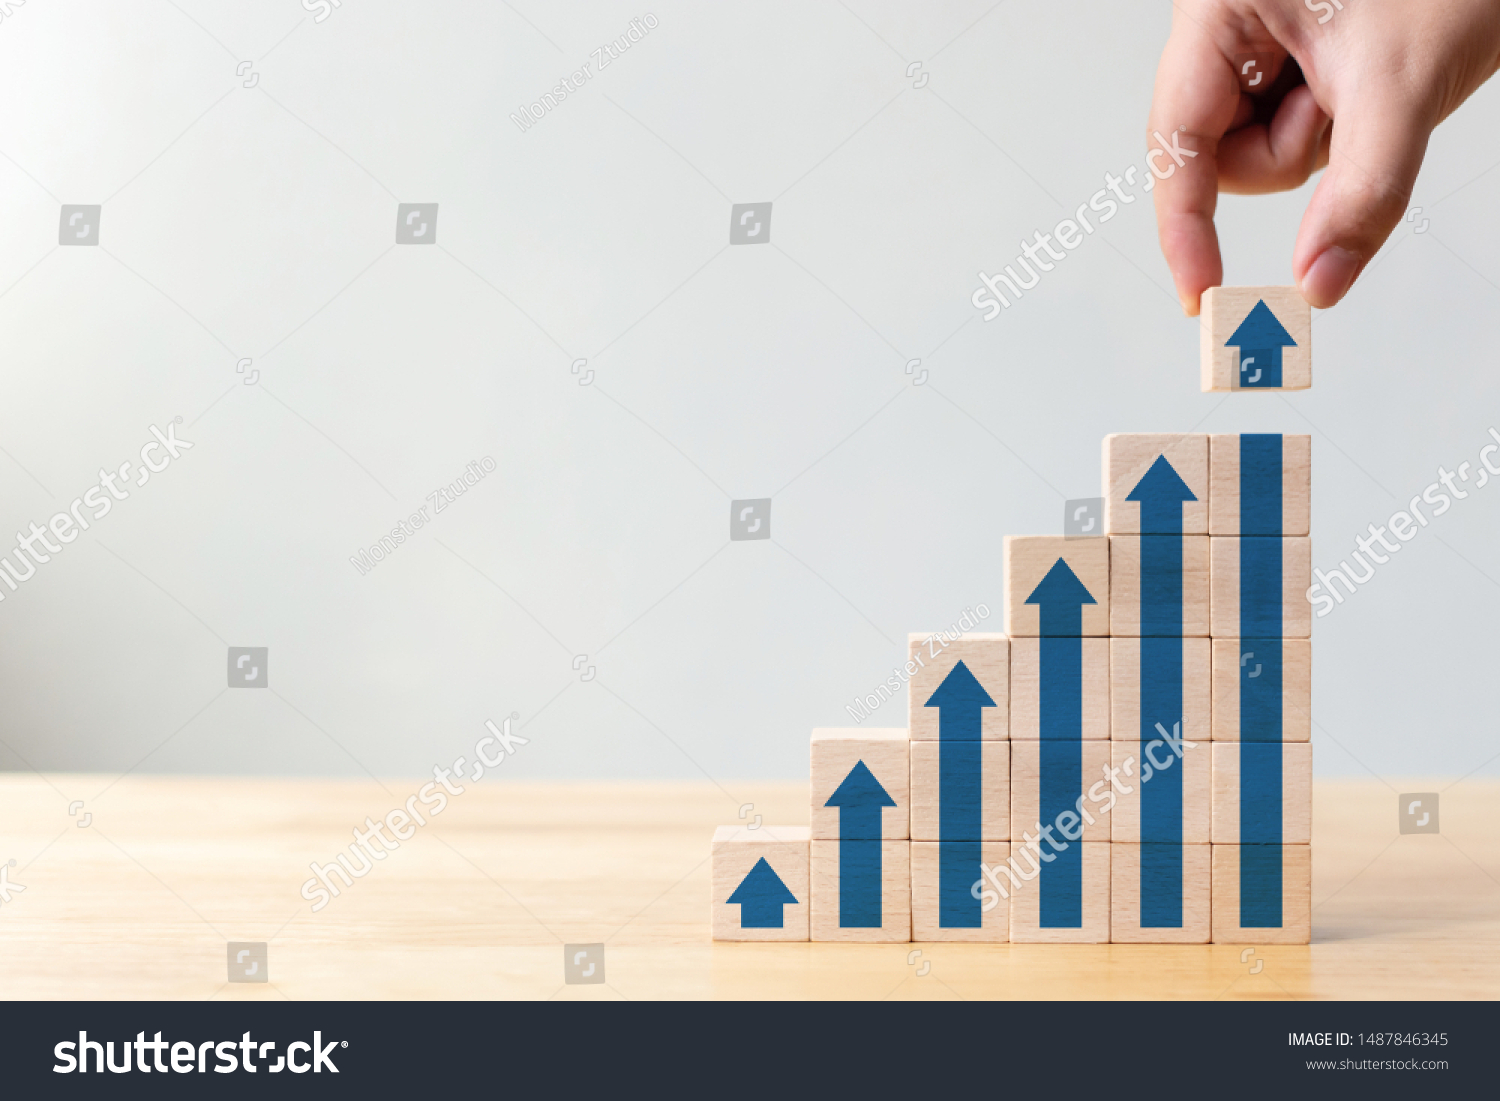 Ladder career path for business growth success process concept.Hand arranging wood block stacking as step stair with arrow up #1487846345